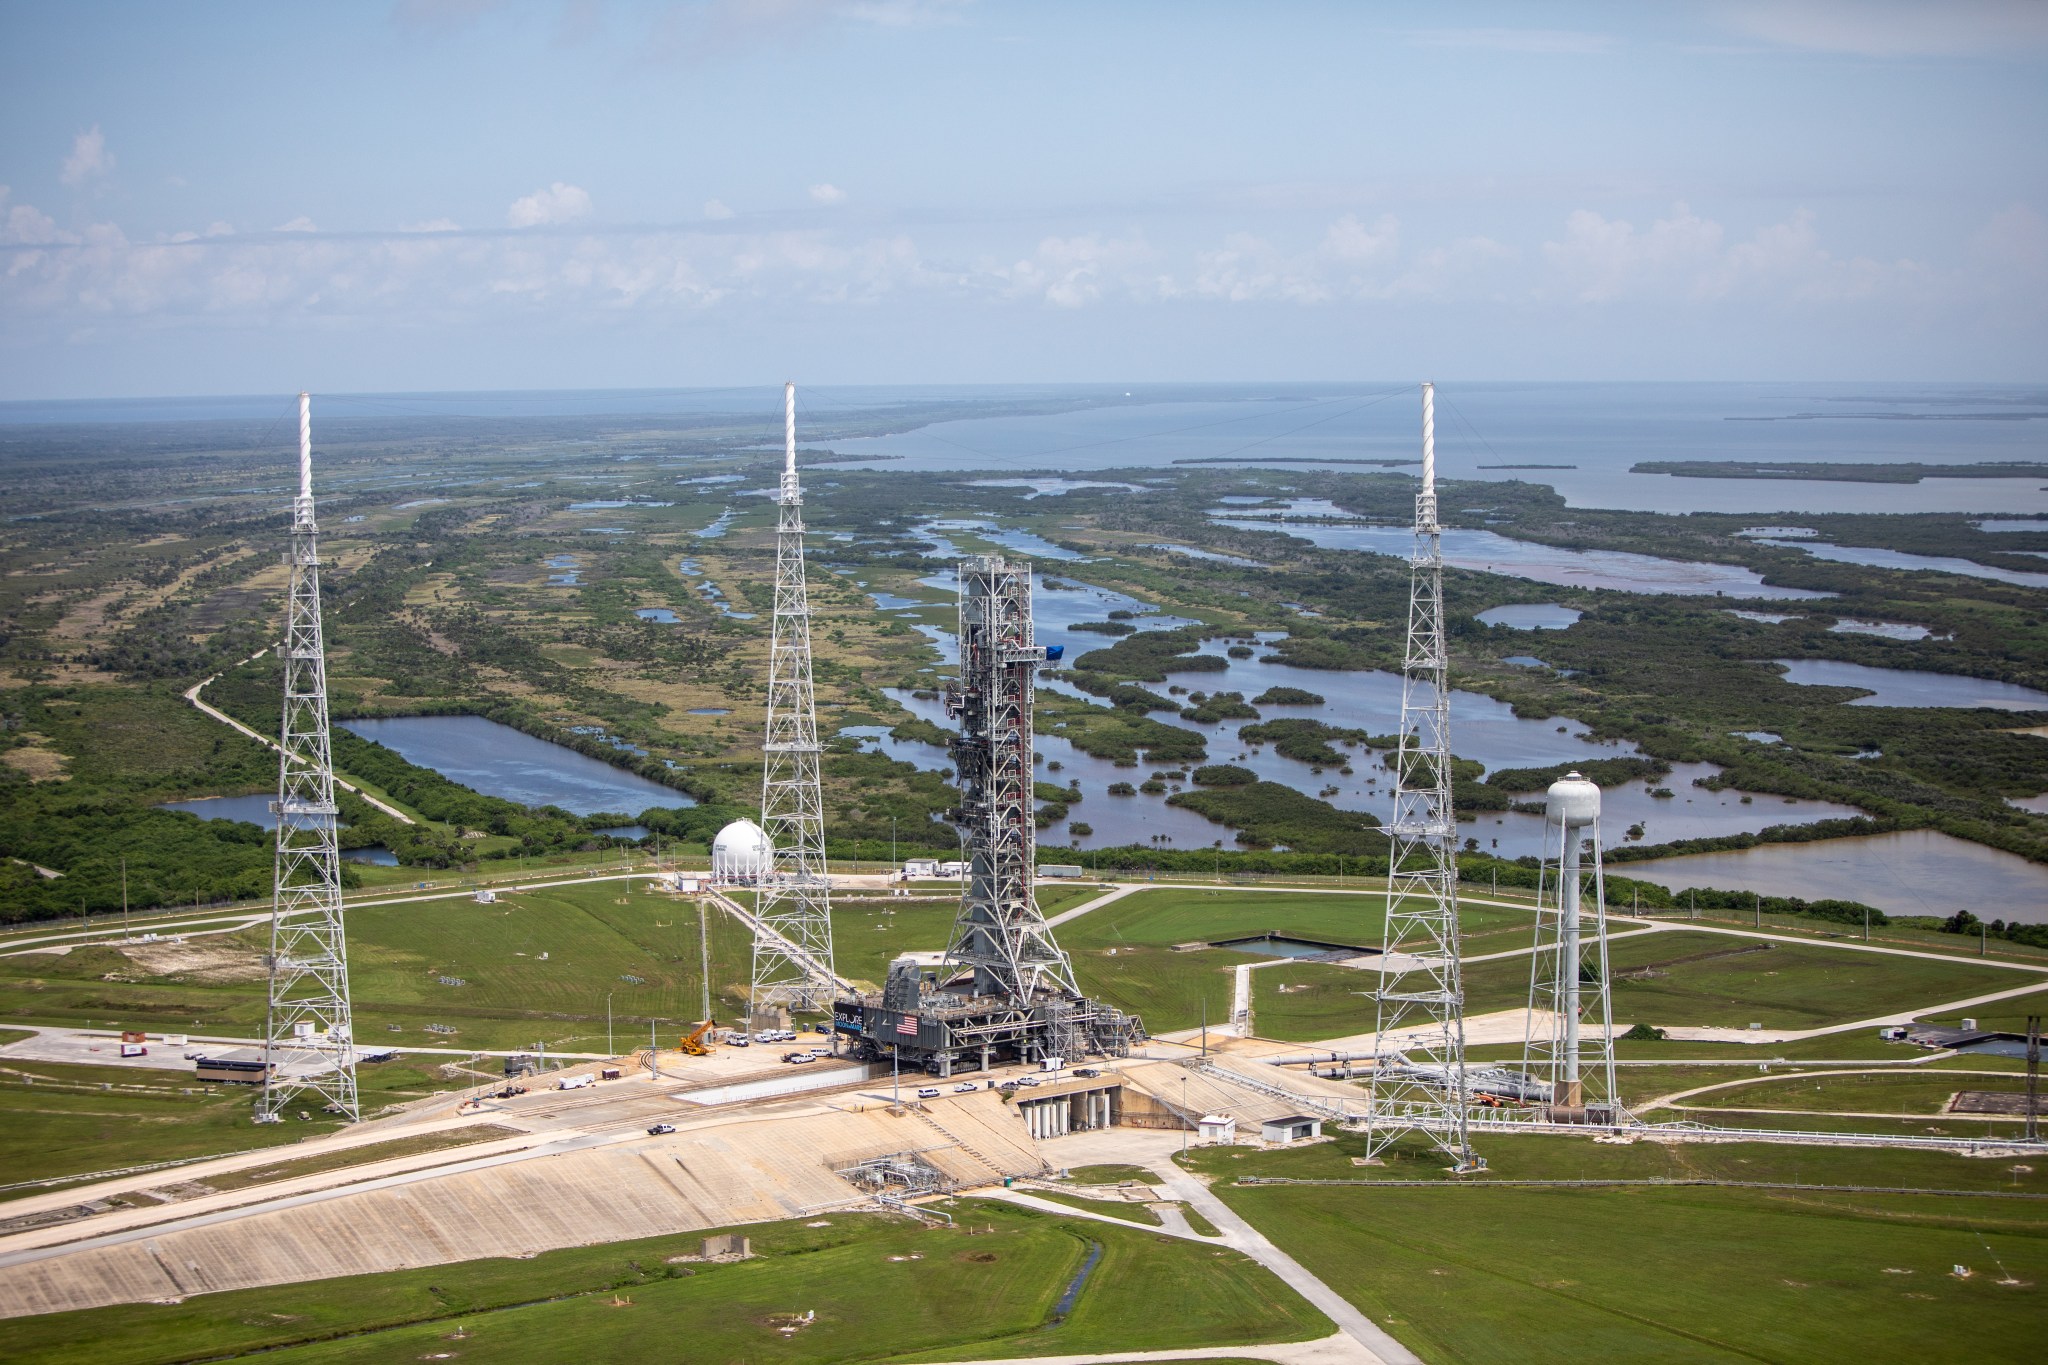 An aerial view of the mobile launcher at Kennedy Space Center's Launch Pad 39B.